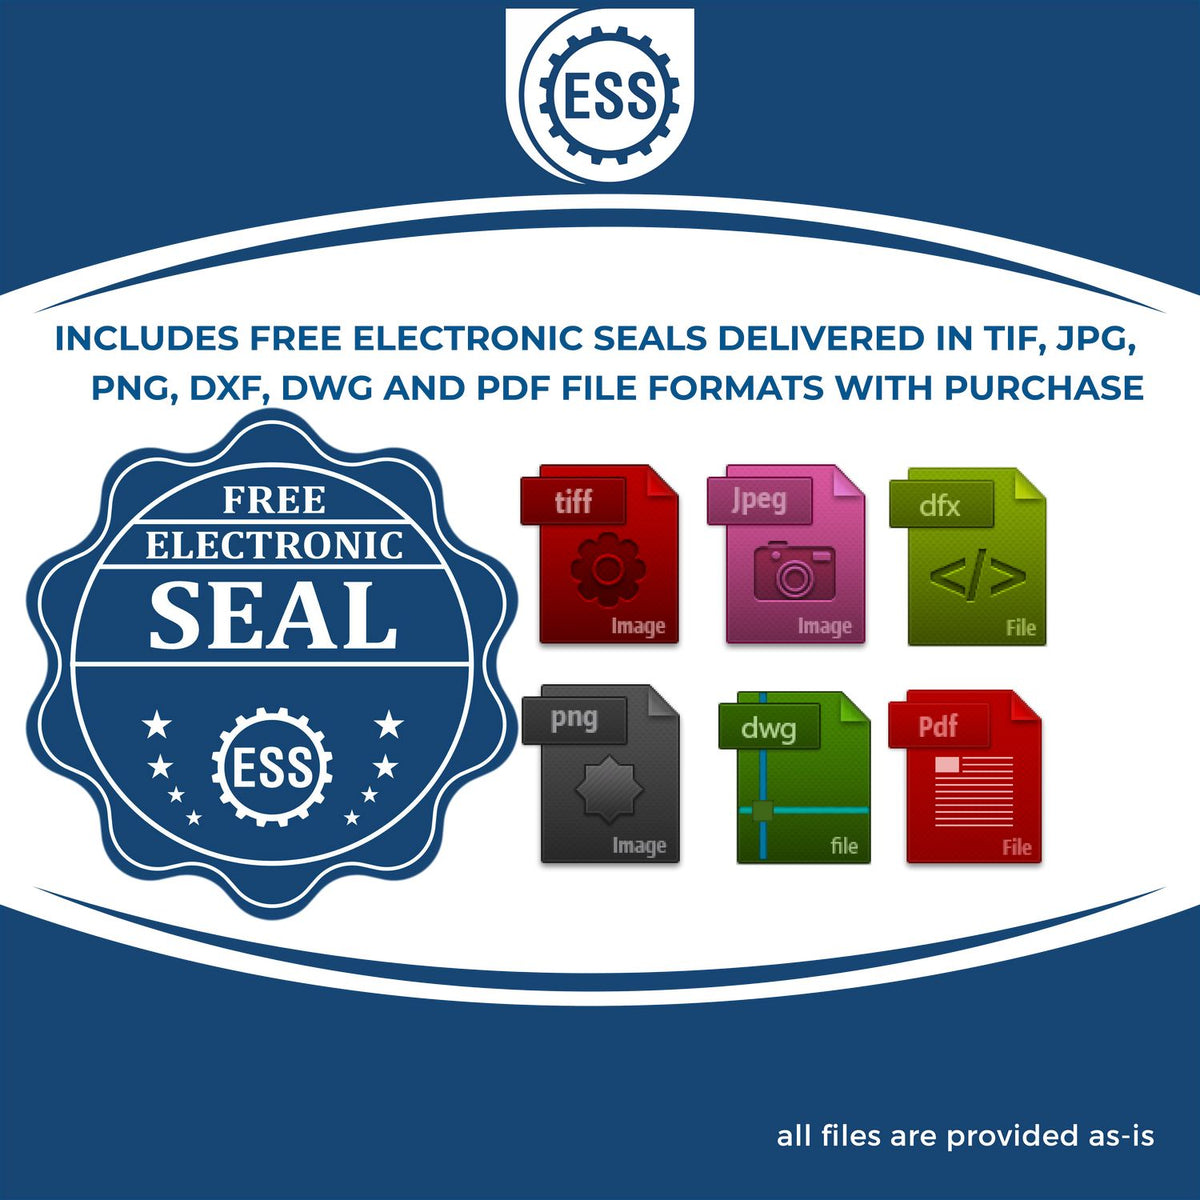 An infographic for the free electronic seal for the Alabama Desk Surveyor Seal Embosser illustrating the different file type icons such as DXF, DWG, TIF, JPG and PNG.